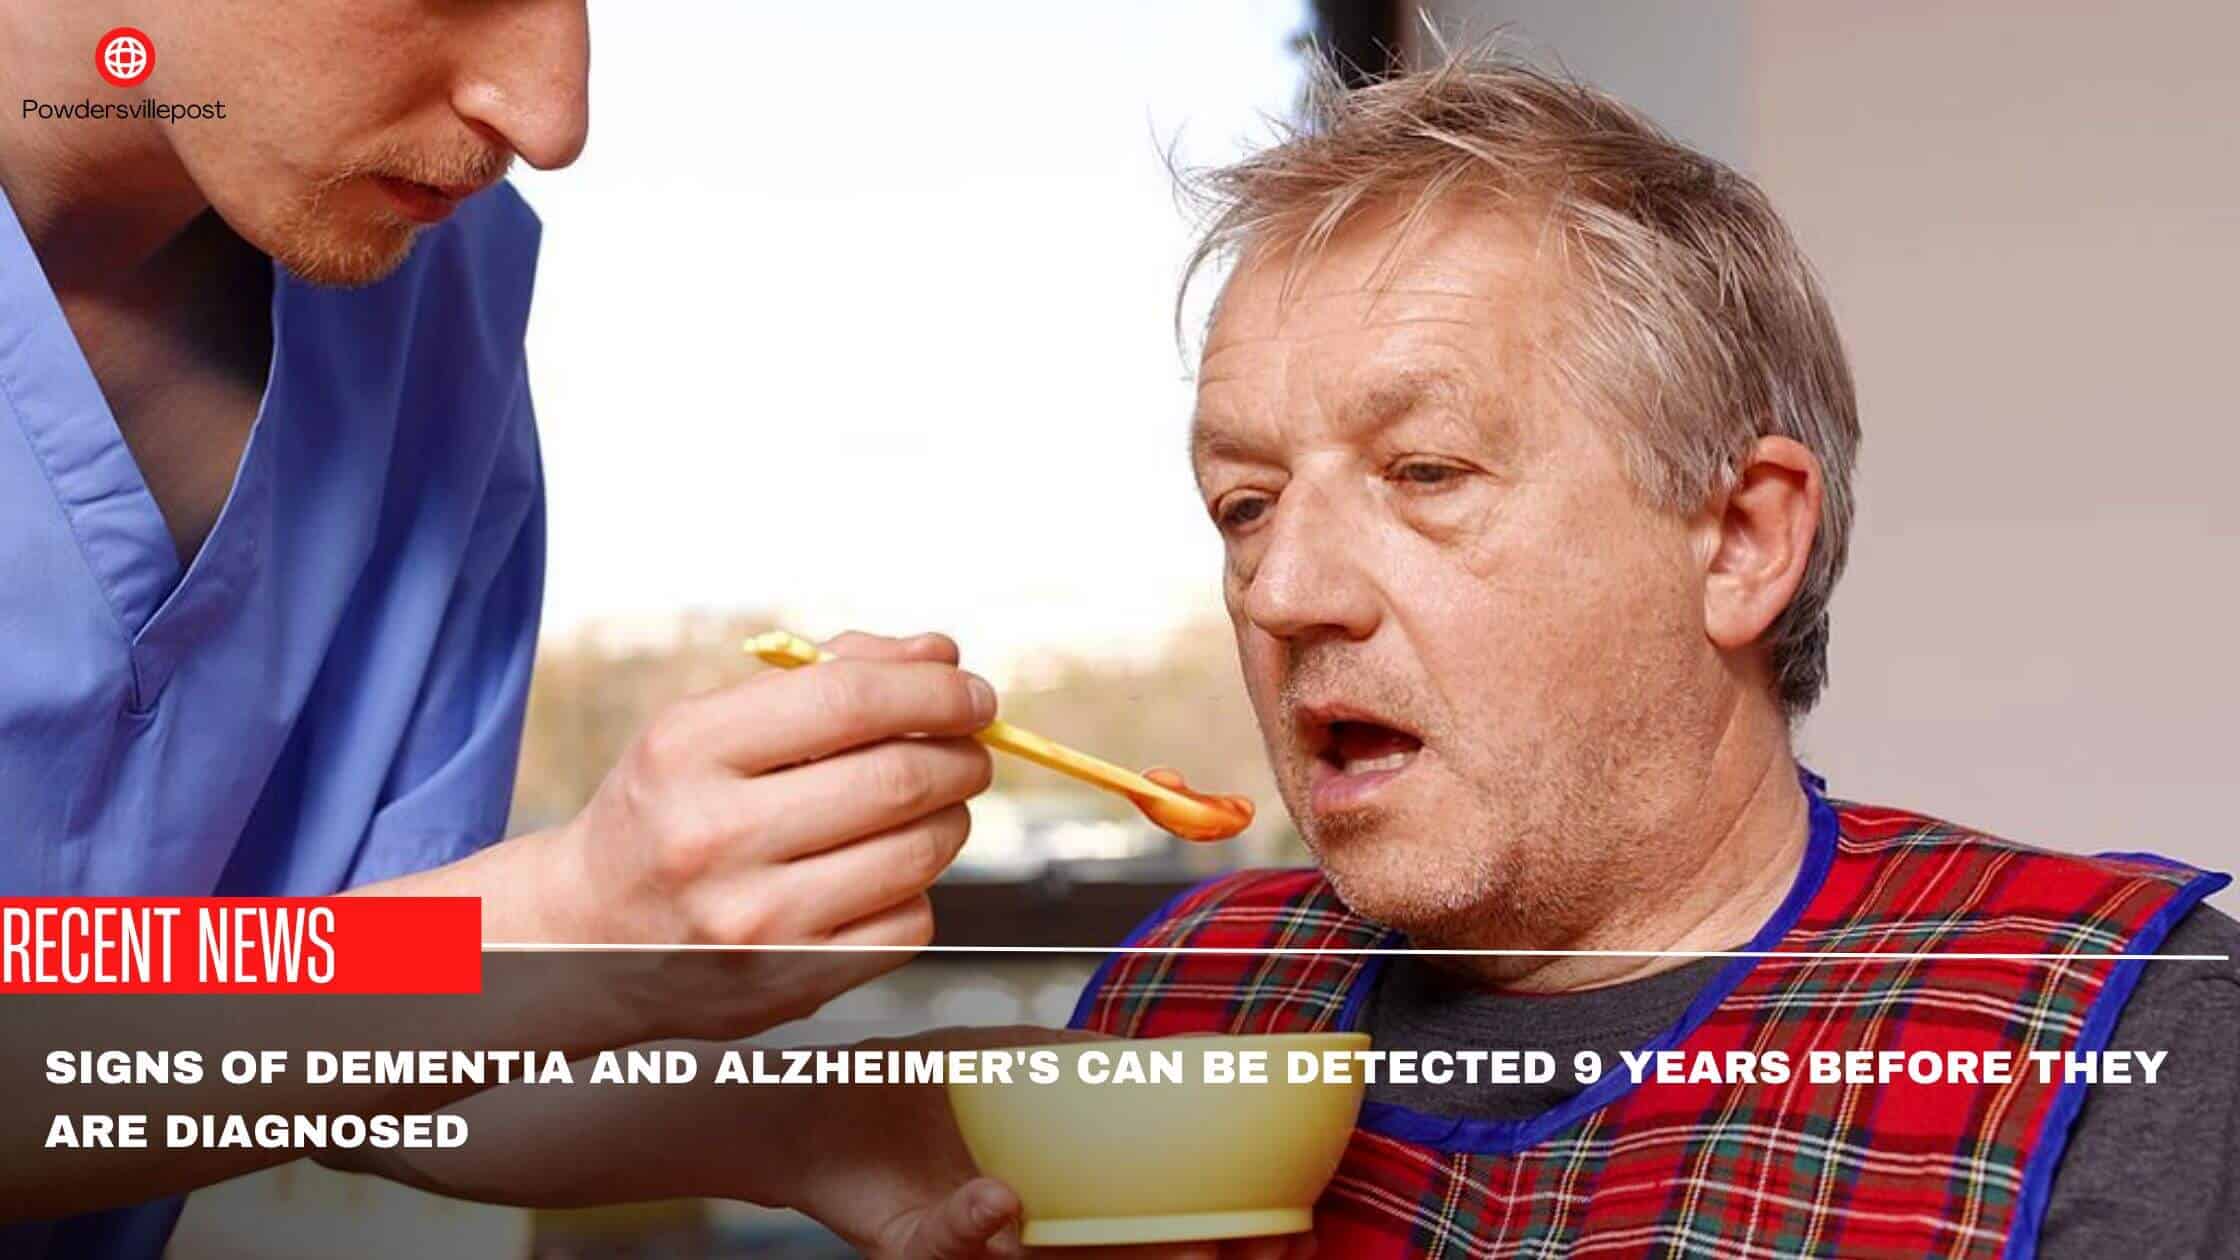 Signs Of Dementia And Alzheimer's Can Be Detected 9 Years Before They Are Diagnosed